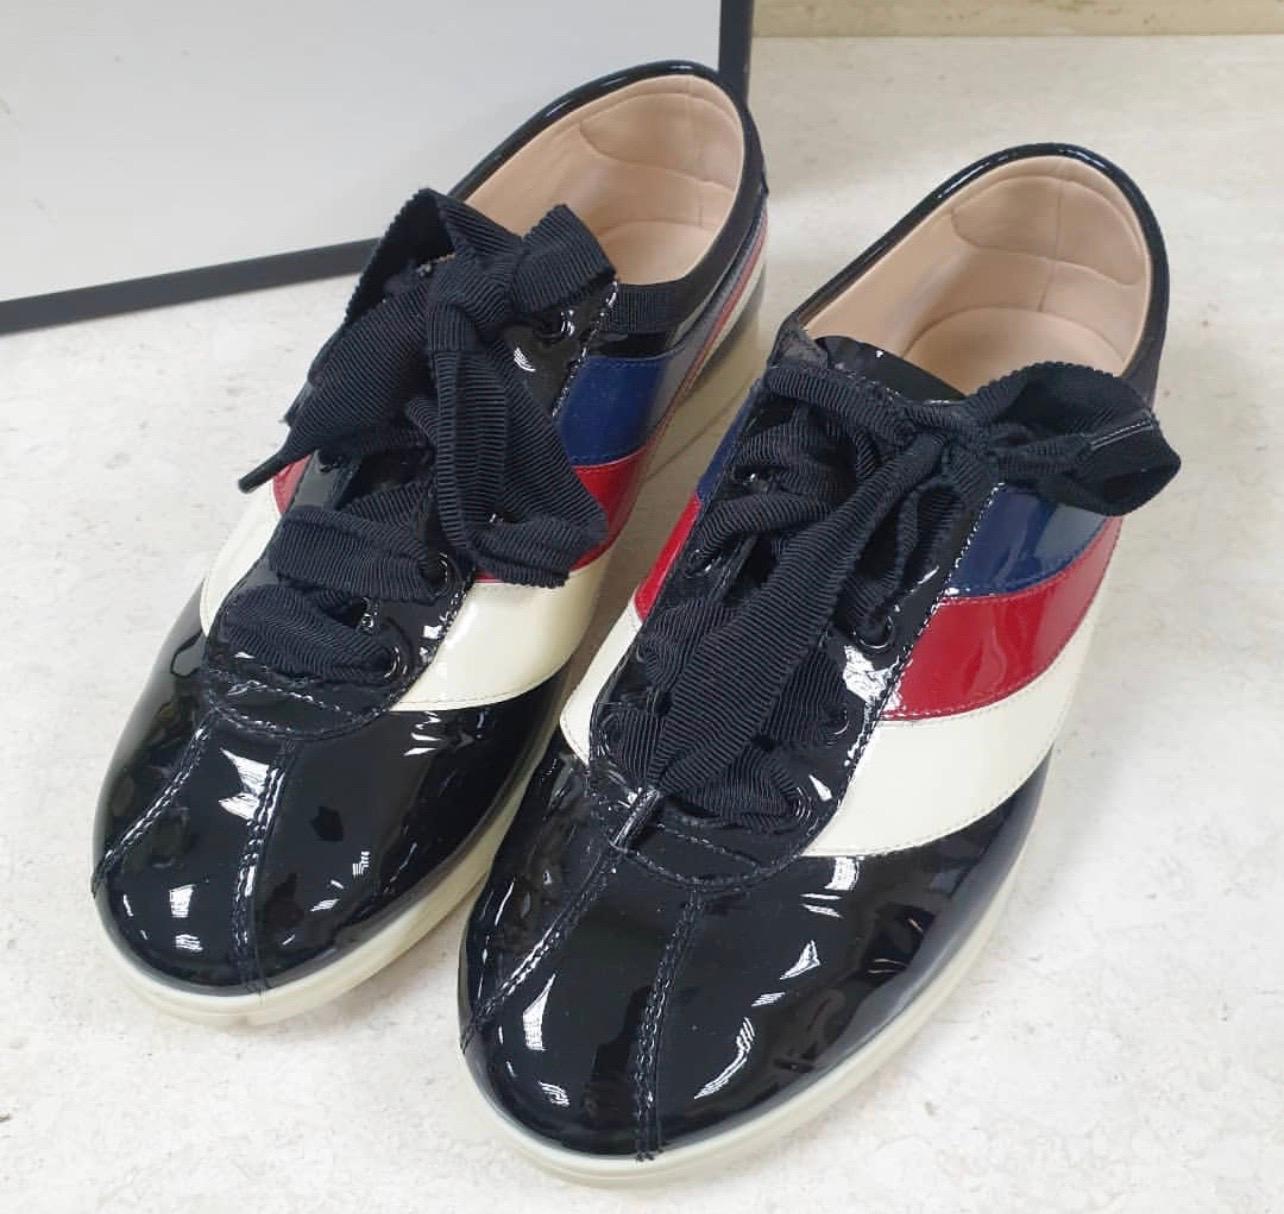 These adorable sneakers are from Gucci. They've been crafted from patent leather and designed as round toes with other details such as lace-ups and butterfly appliques on the uppers. 

The sneakers will offer both comfort and style.

Sz.38

Box is